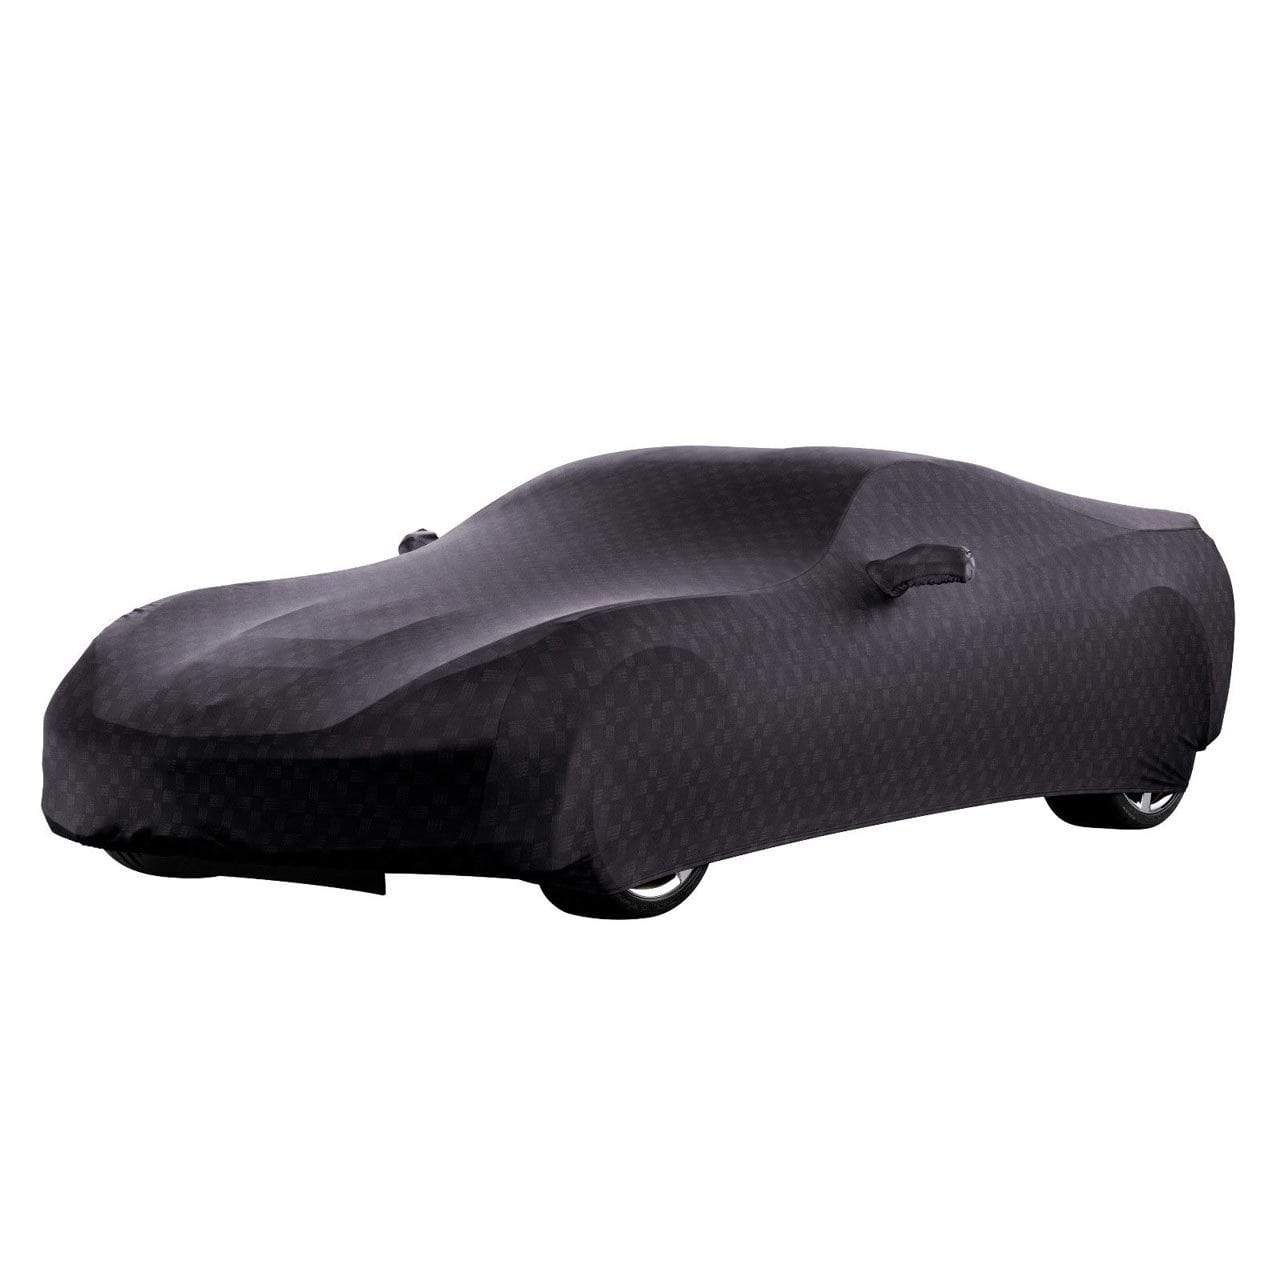 Indoor car cover for C7 Corvette Z06, SKU 45-4-223, with Corvette and Z06 logos, protects from dust and debris, includes storage bag.